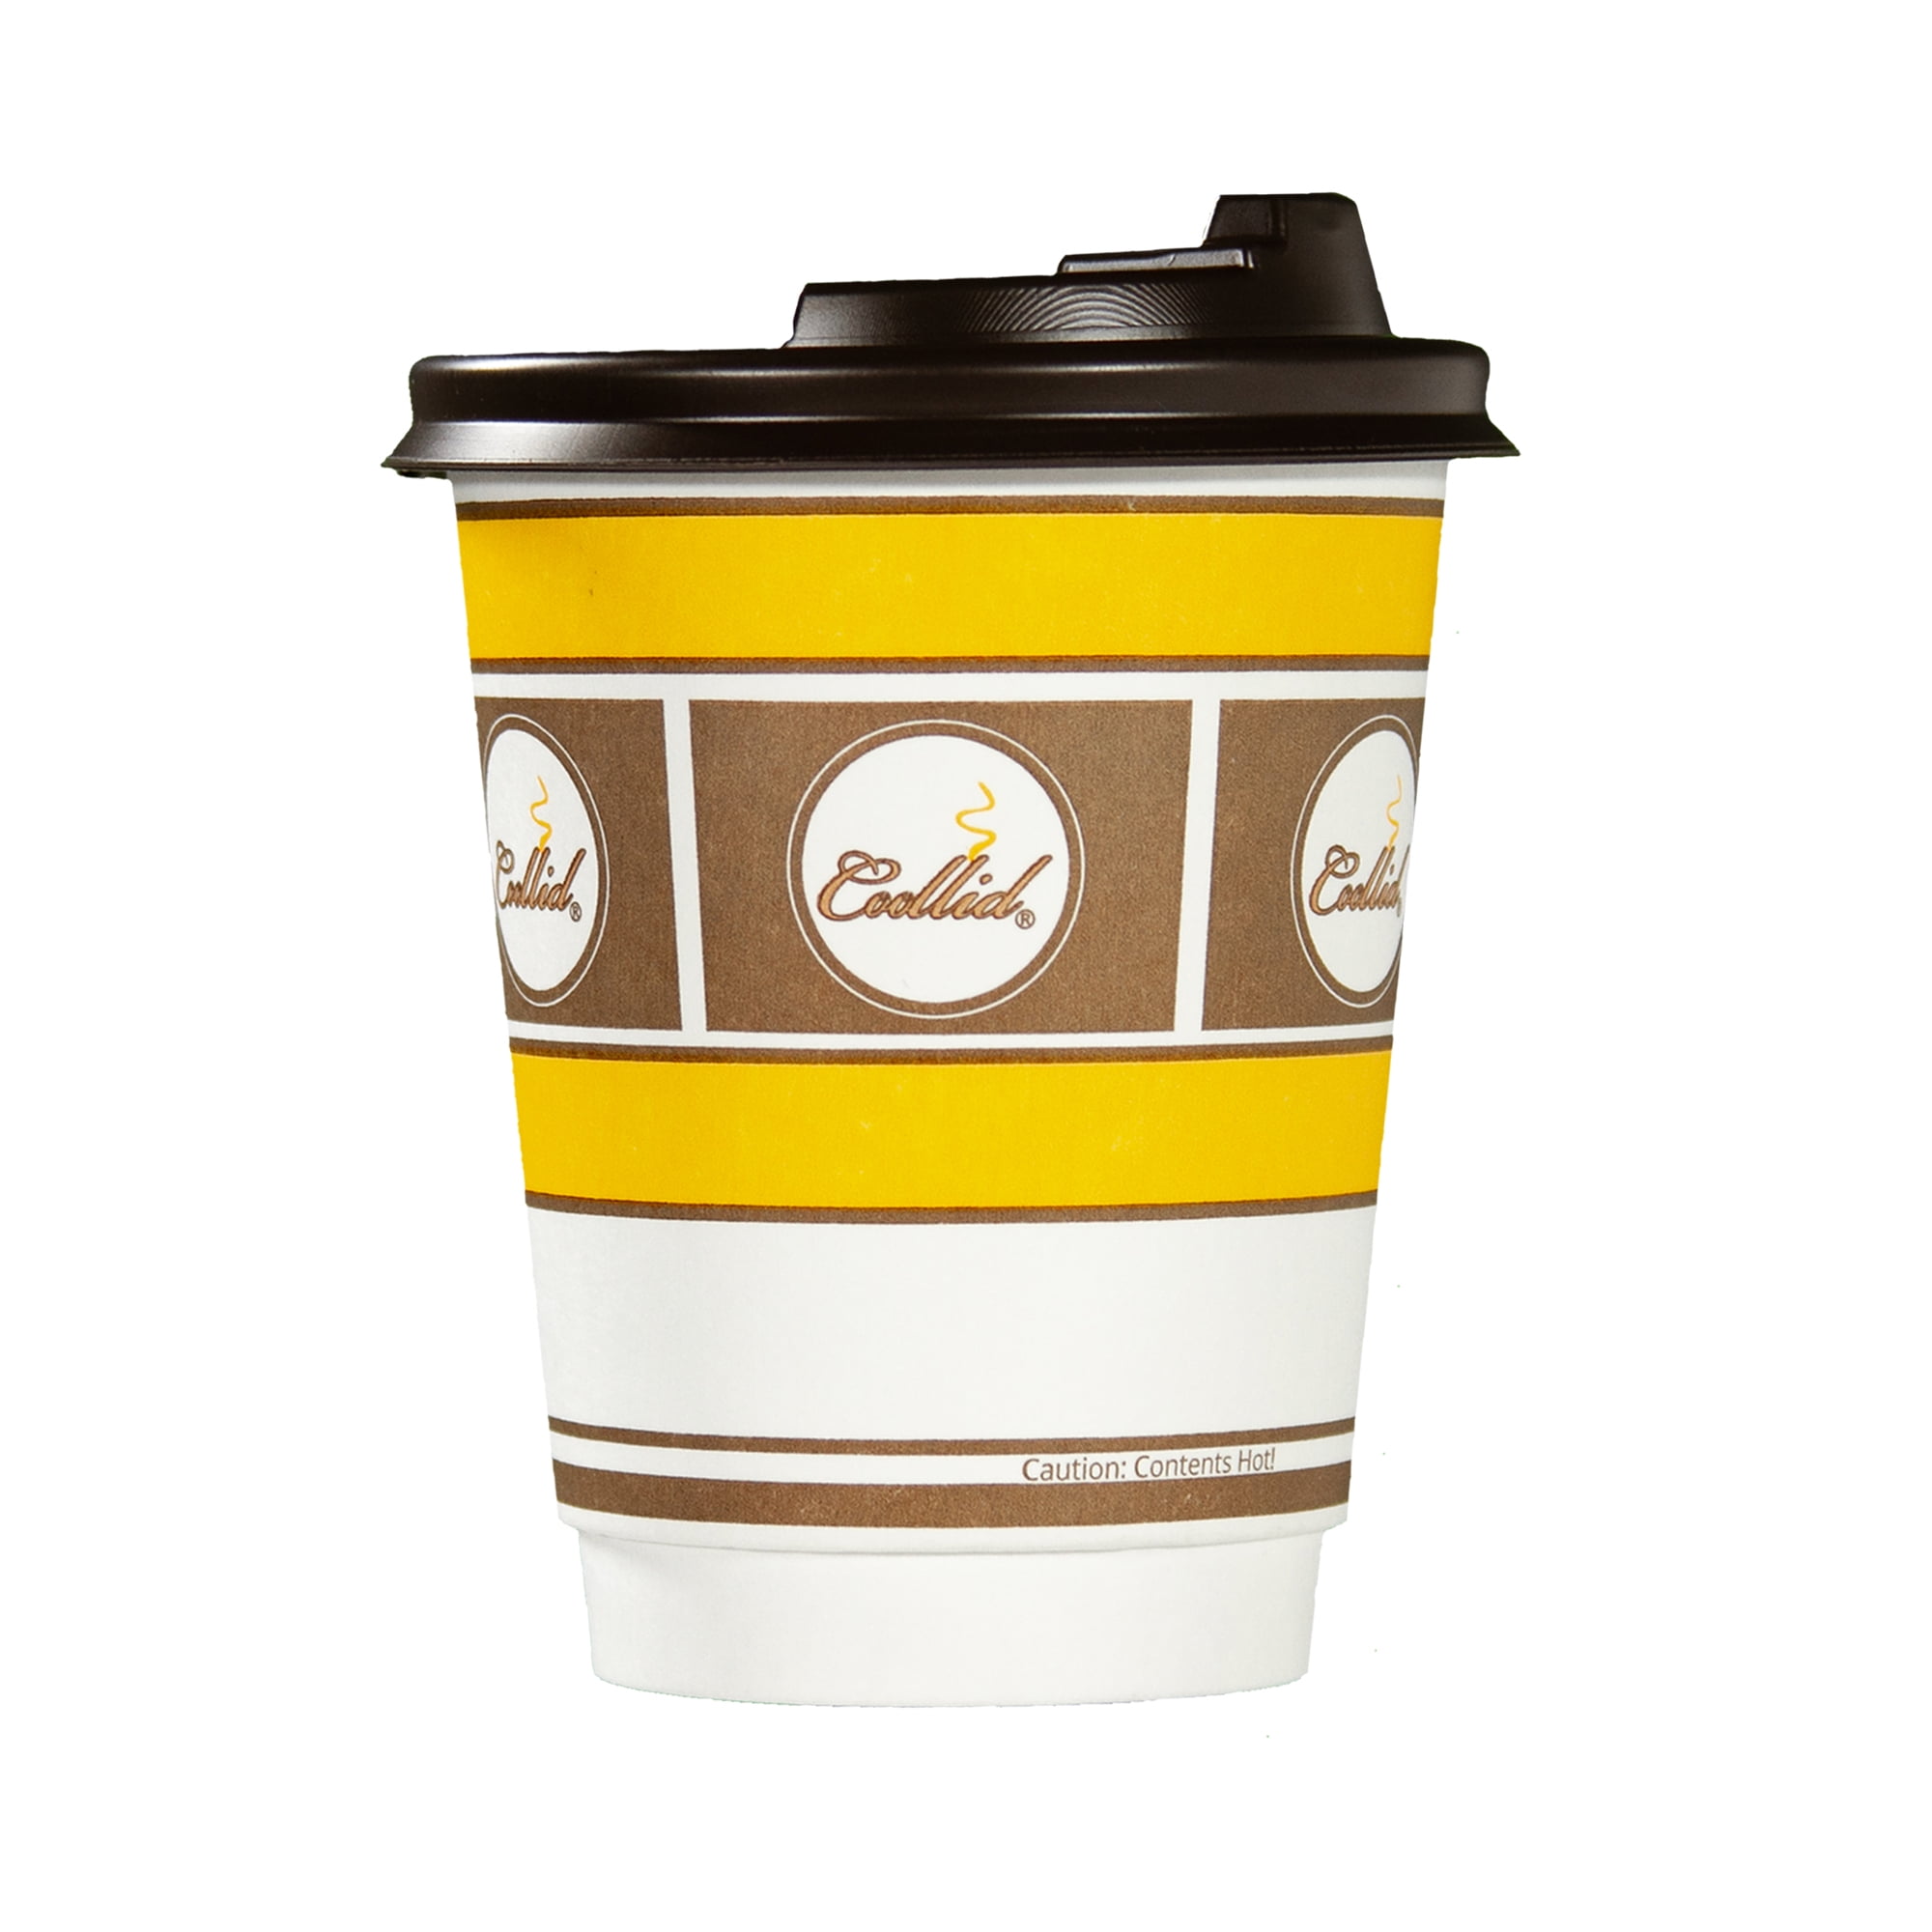 Disposable Paper Coffee Cups with Lids - 16 oz with White Sipper Dome Lids  (90mm)